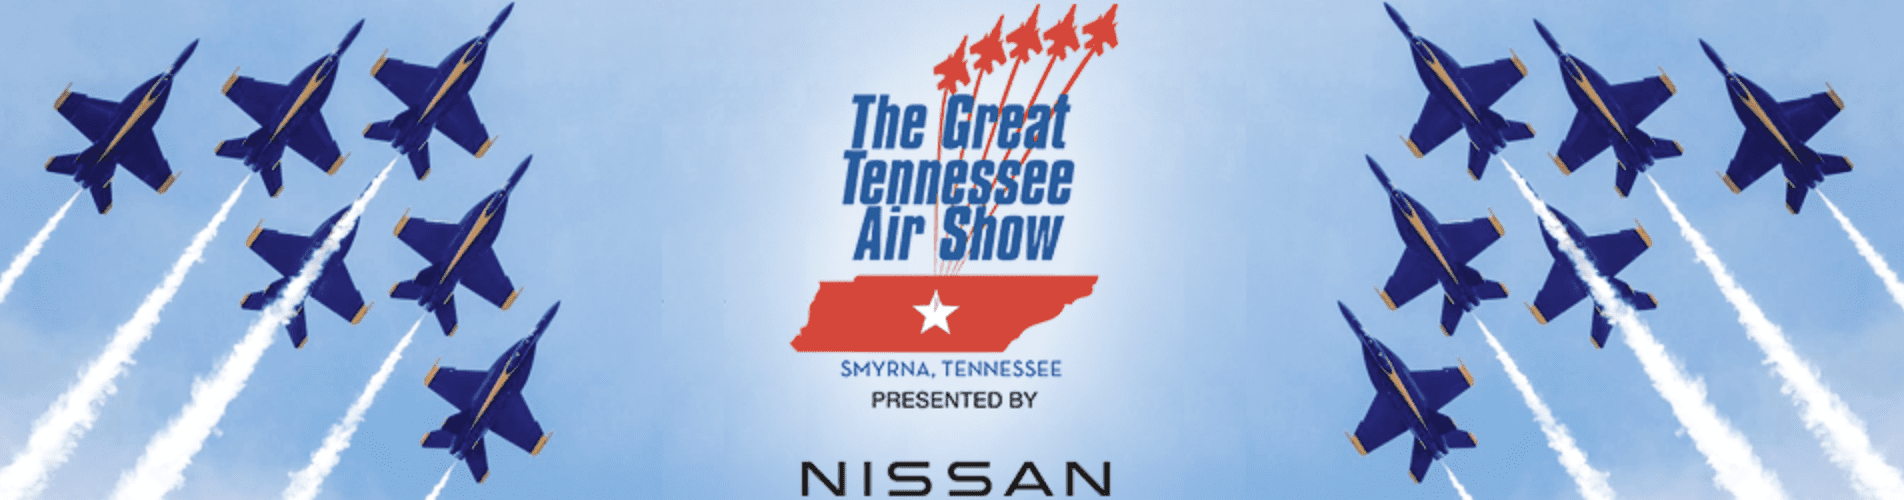 The Great Tennessee Air Show Middle Tennessee.